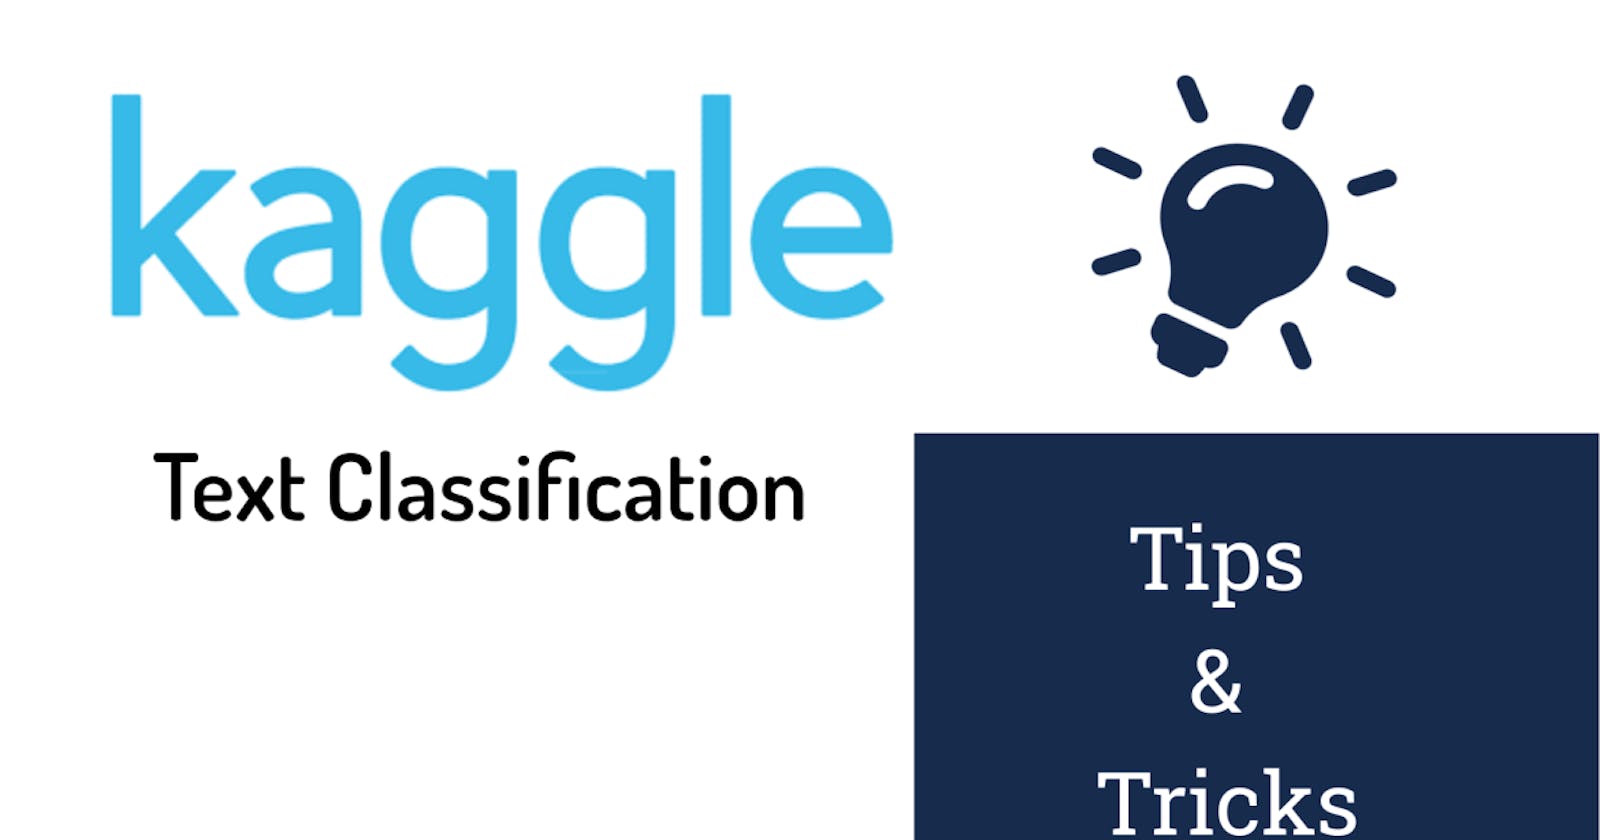 Text Classification: All Tips and Tricks from 5 Kaggle Competitions